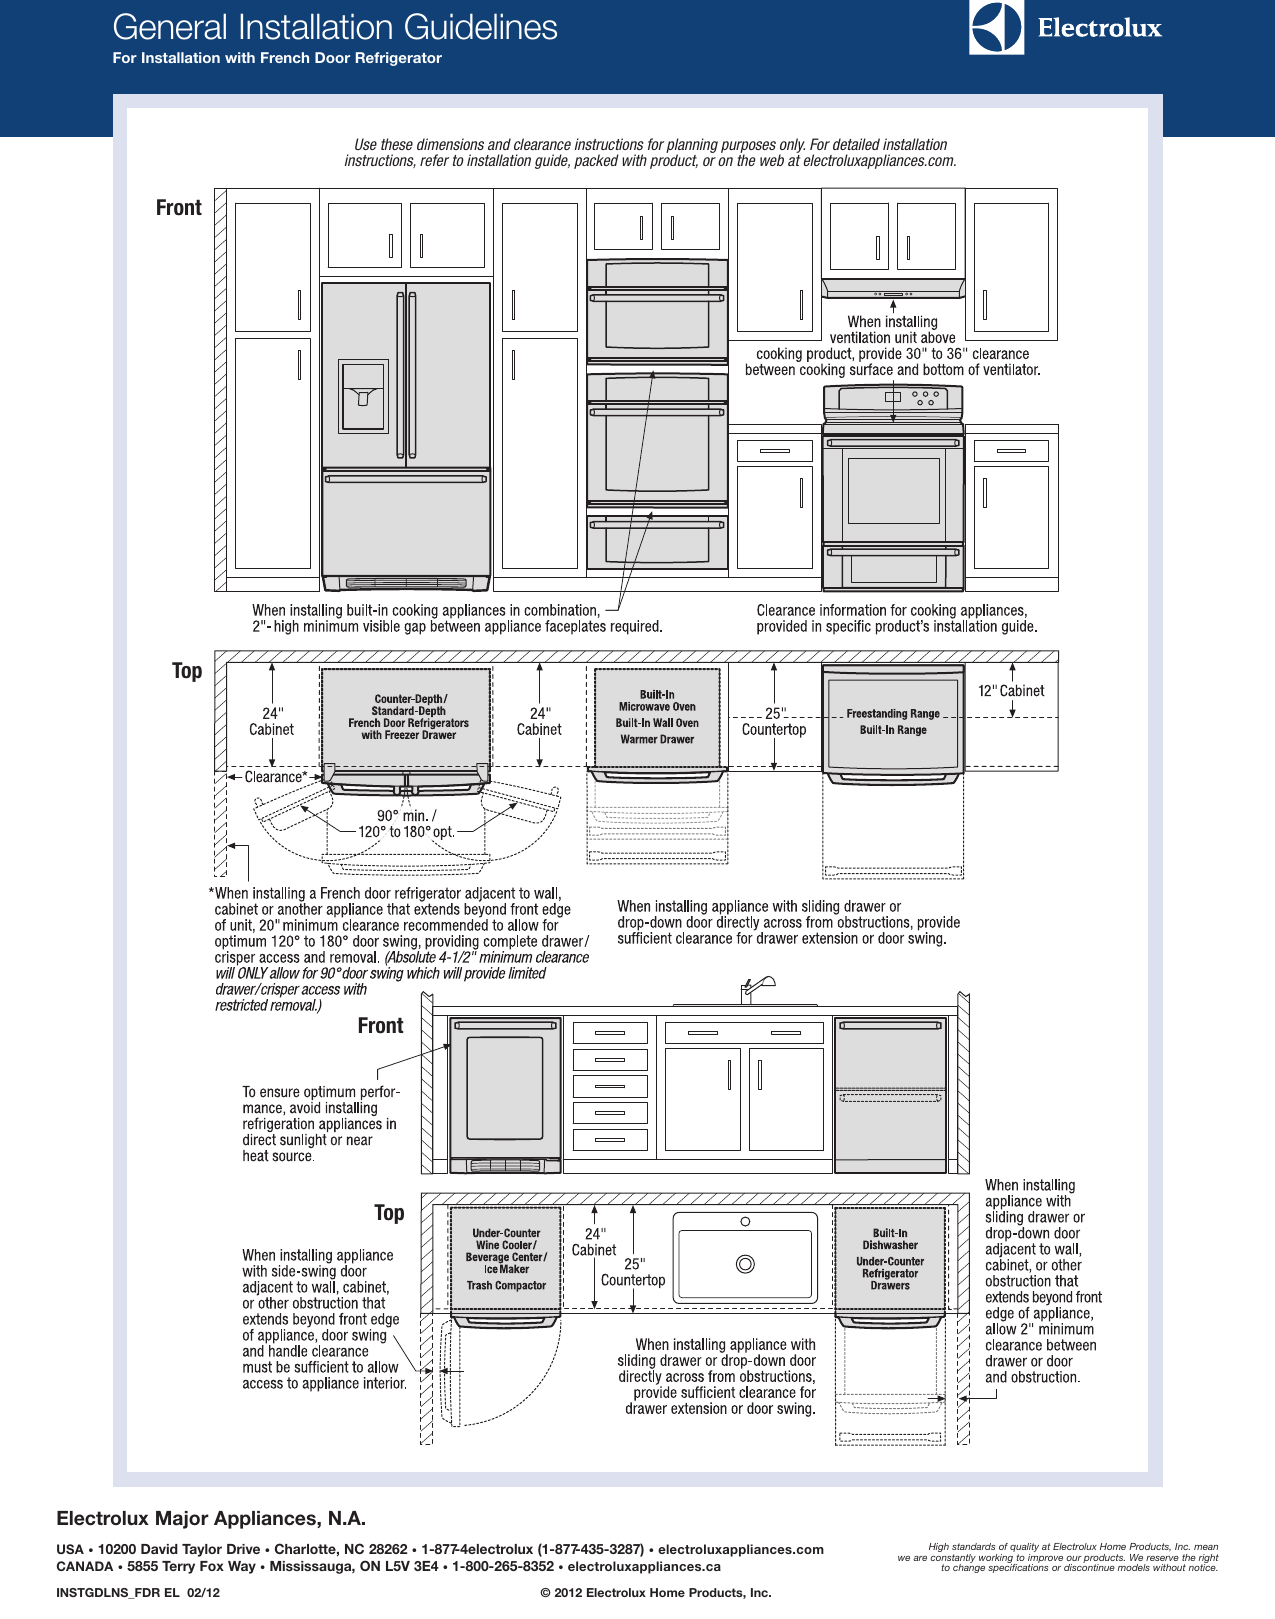 Page 5 of 6 - Electrolux Electrolux-24-Under-Counter-Wine-Cooler-With-Right-Door-Swing-Ei24Wc10Qs-Product-Specifications-Sheet-  Electrolux-24-under-counter-wine-cooler-with-right-door-swing-ei24wc10qs-product-specifications-sheet